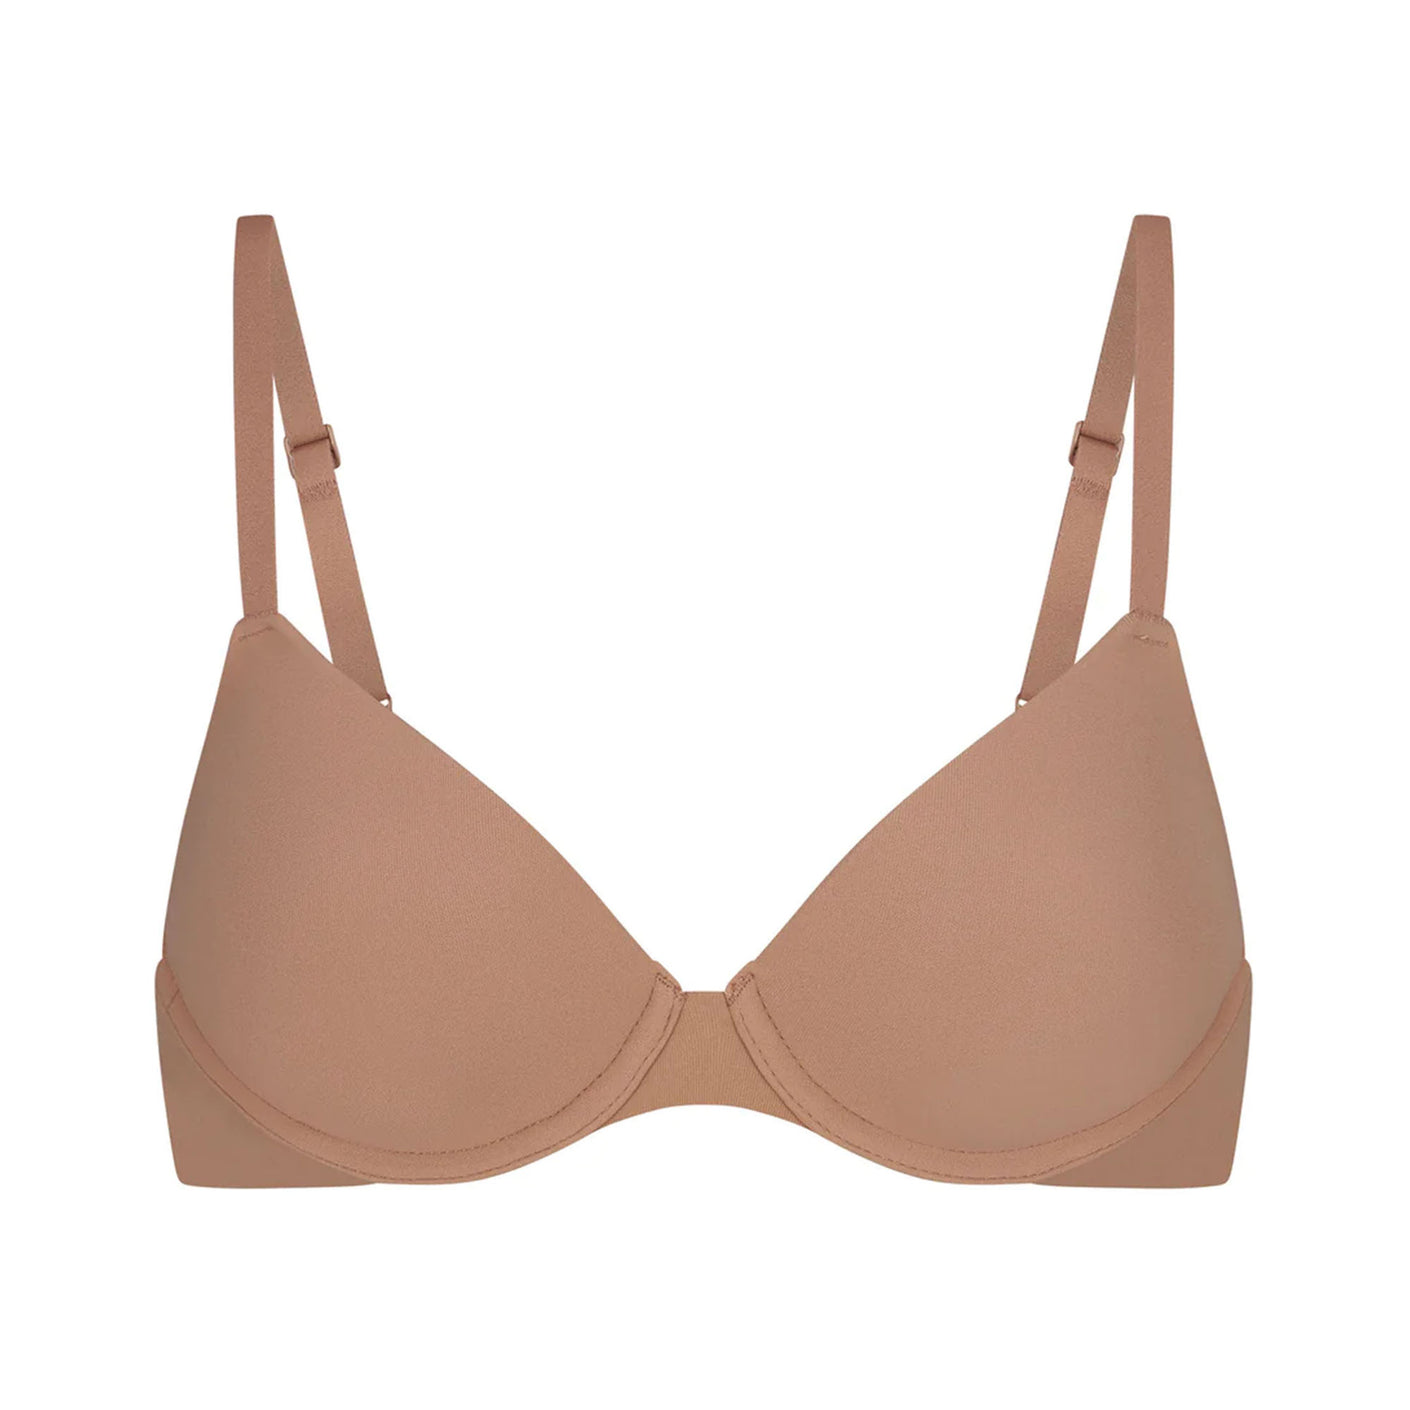 Track Skims Lace Unlined Balconette Bra - Sienna - 36 - A at Skims